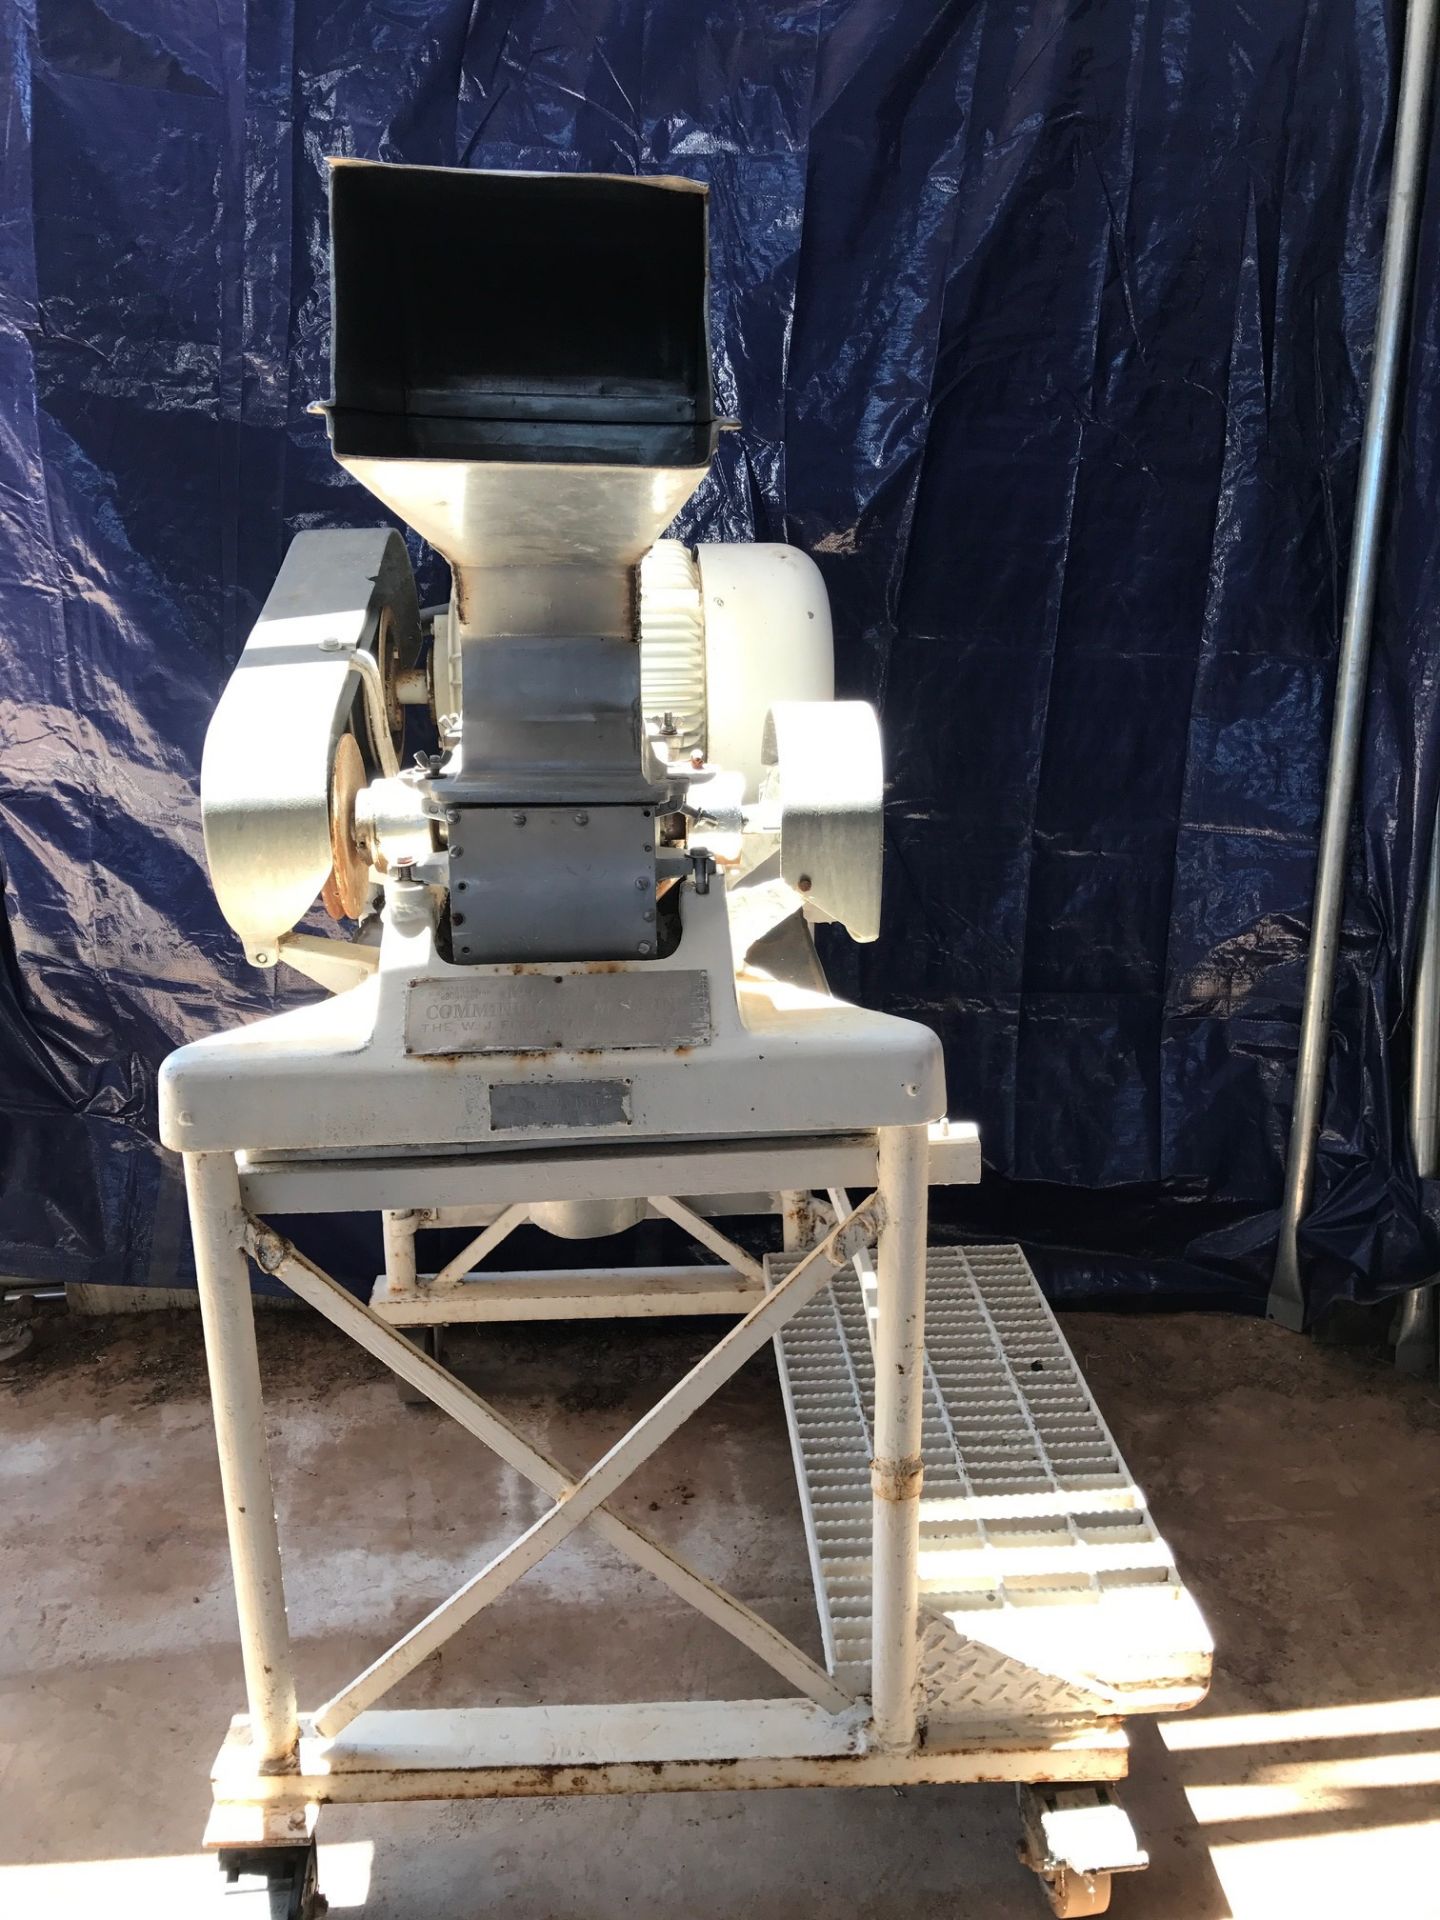 Fitzpatrick (Fitzmill) Comminuting Machine, Model D, stainless steel product hopper, stainless steel